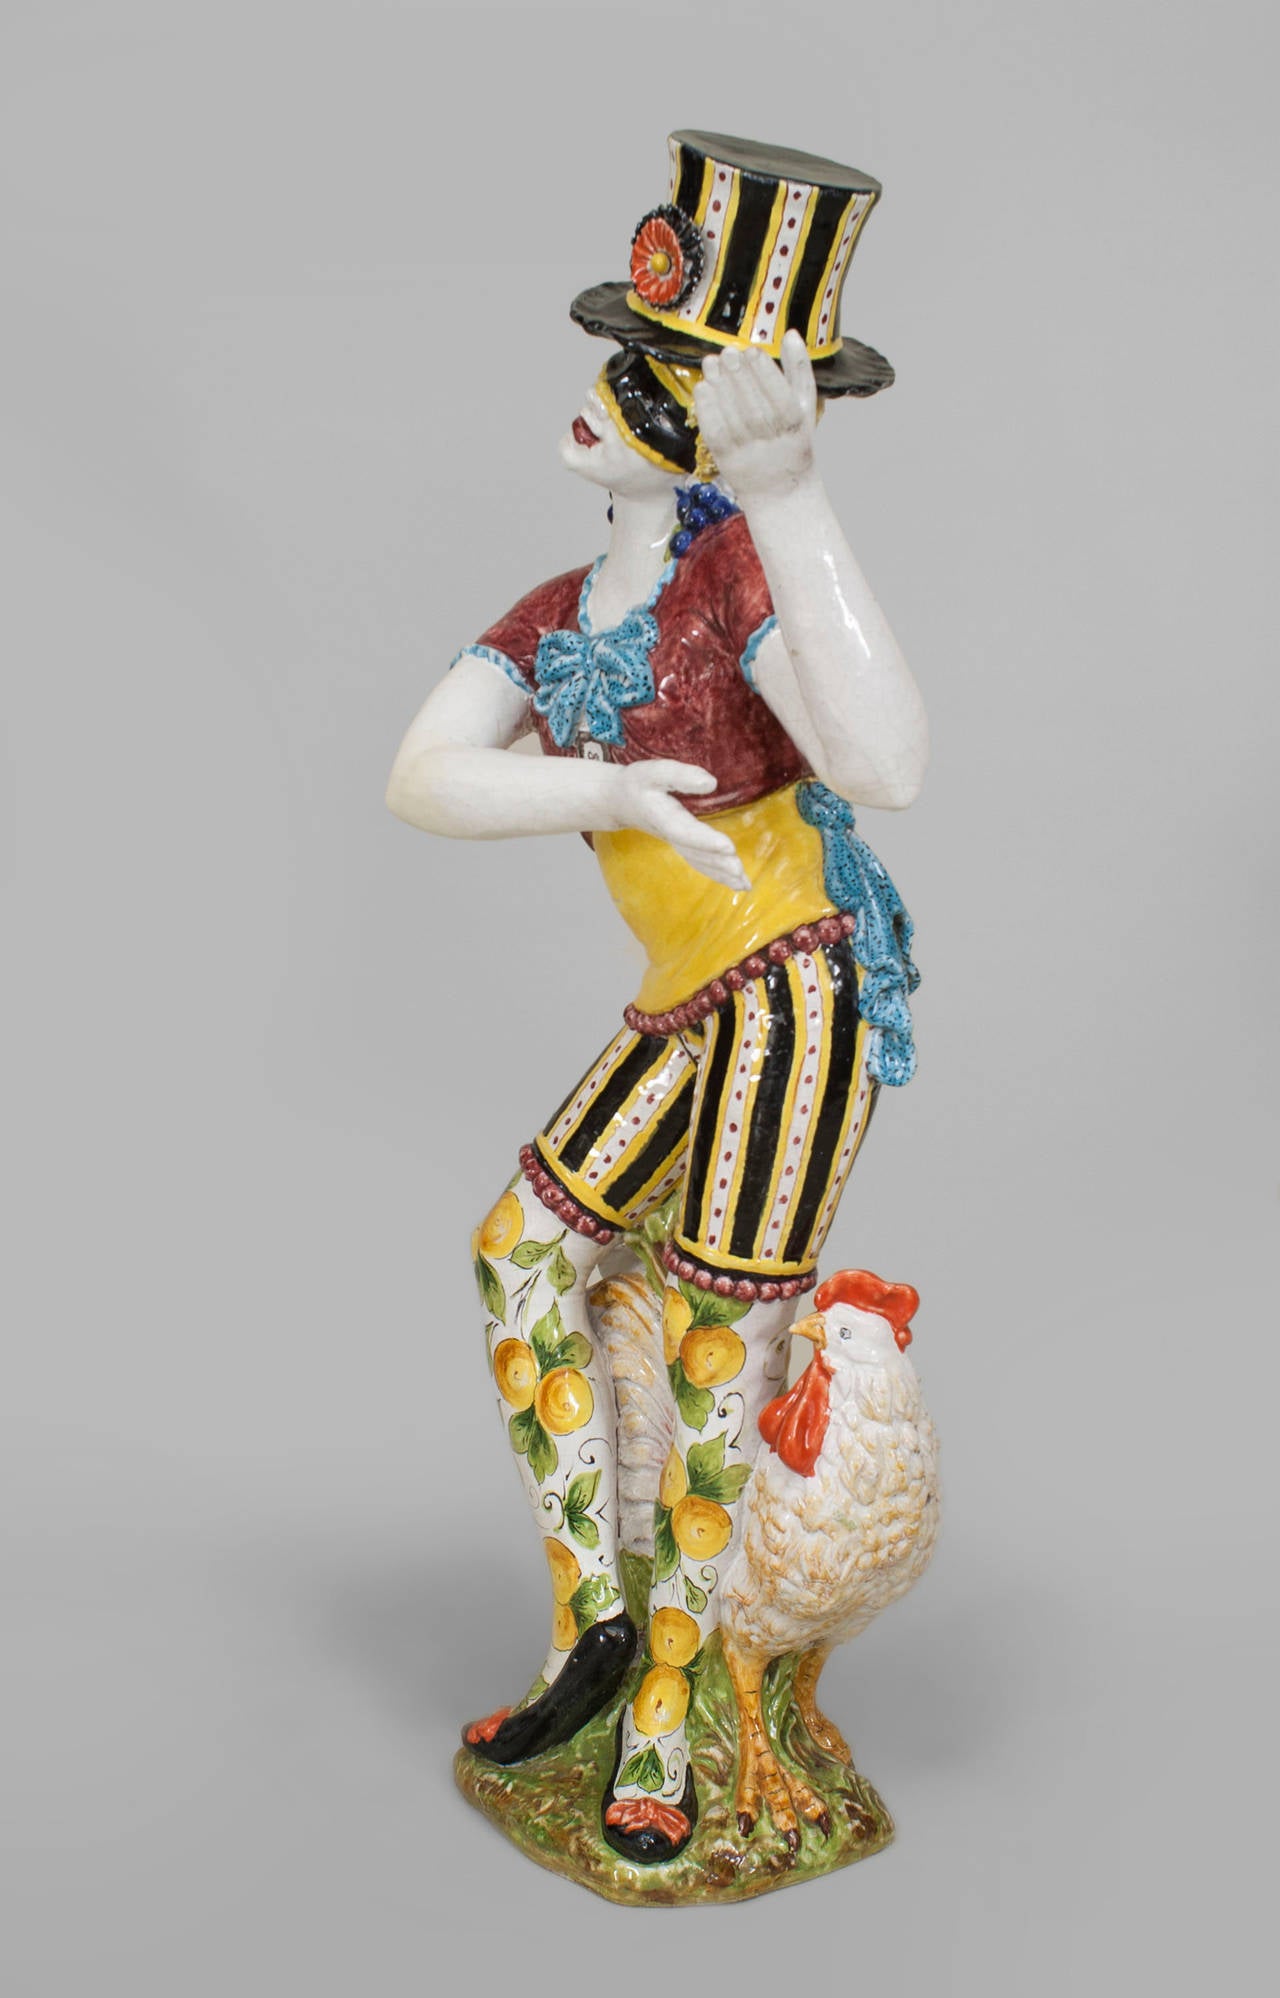 Pair of turn of the century Italian Majolica porcelain male and female
harlequin figures each wearing a top hat, striped pants and a red shirt.